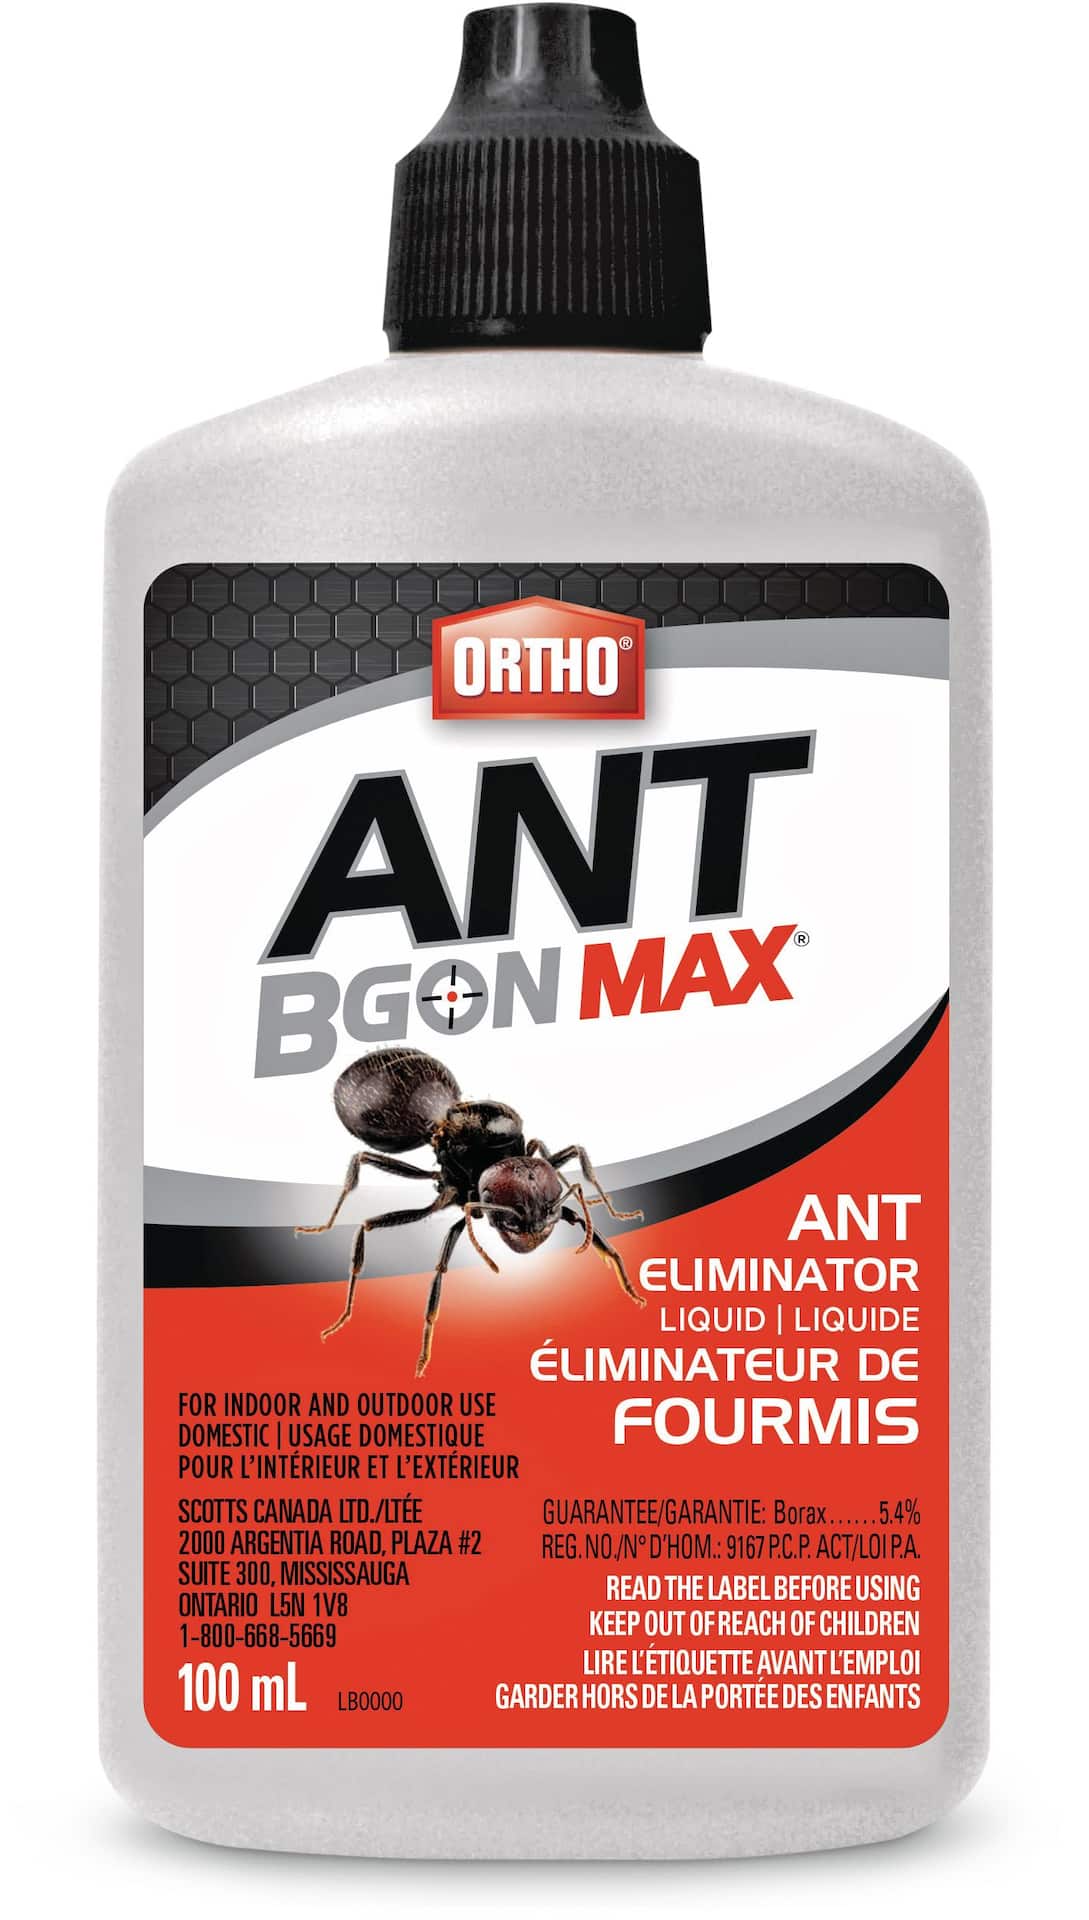 https://media-www.canadiantire.ca/product/seasonal-gardening/gardening/weed-insect-and-pest-control/1591052/ant-b-gon-liquid-100ml-3923db94-443b-41ad-9c7b-3afe0ad2529f-jpgrendition.jpg